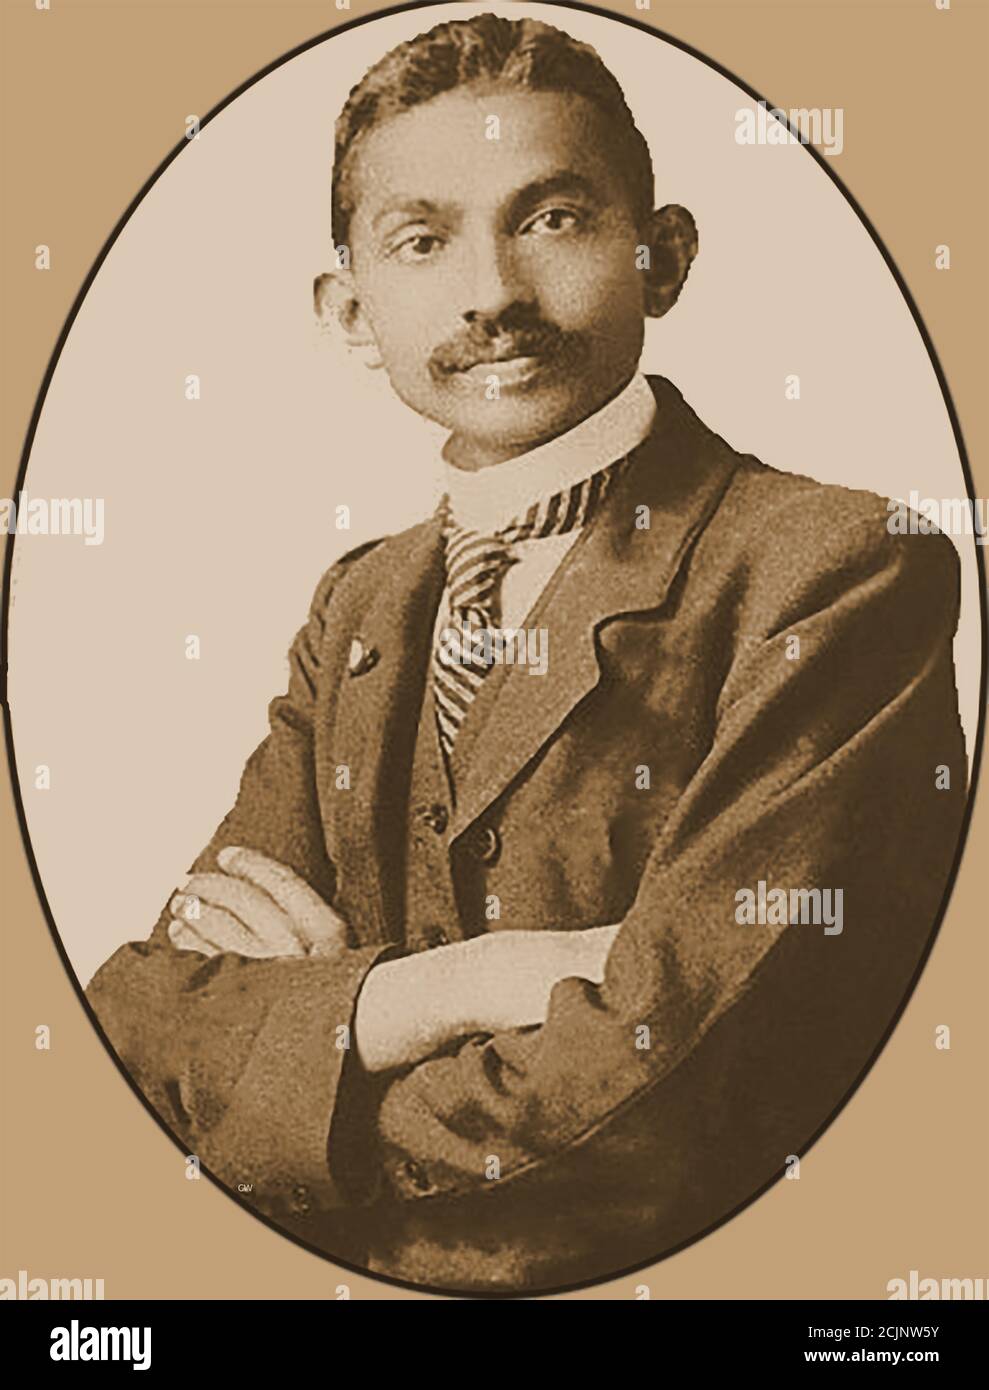 A  portrait of a young Mahatma Gandhi (aged 37) -- Mohandas Karamchand Gandhi (1869 – 1948) was an Indian lawyer, civil rights activist, anti-colonial nationalist, and political ethicist,  who  was famous for his nonviolent resistance in his  successful campaign for India's independence from British rule. Stock Photo